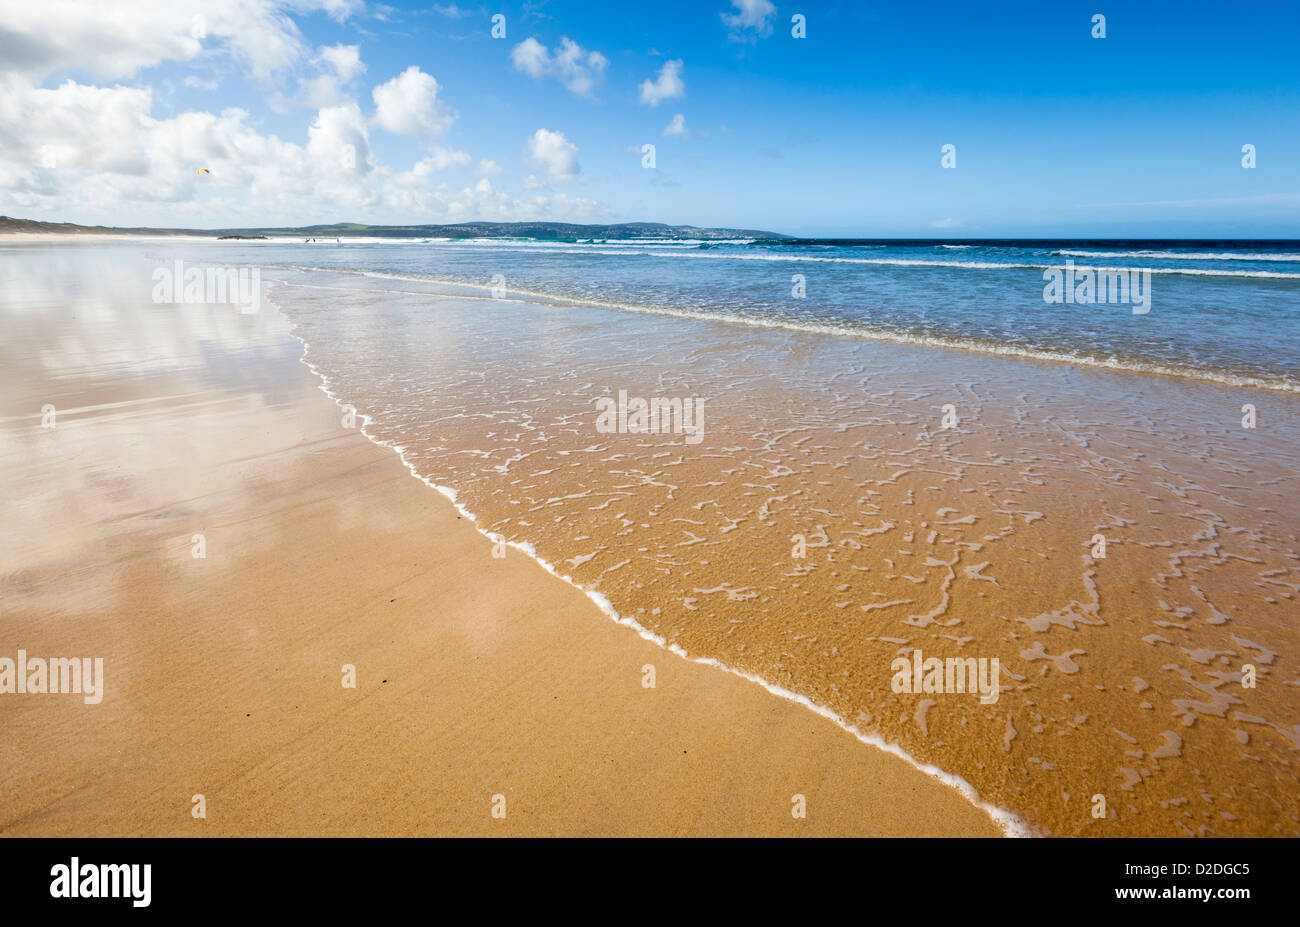 Surf gently breaking on the sandy beach at Gwithian in Cornwall, UK. Stock Photo